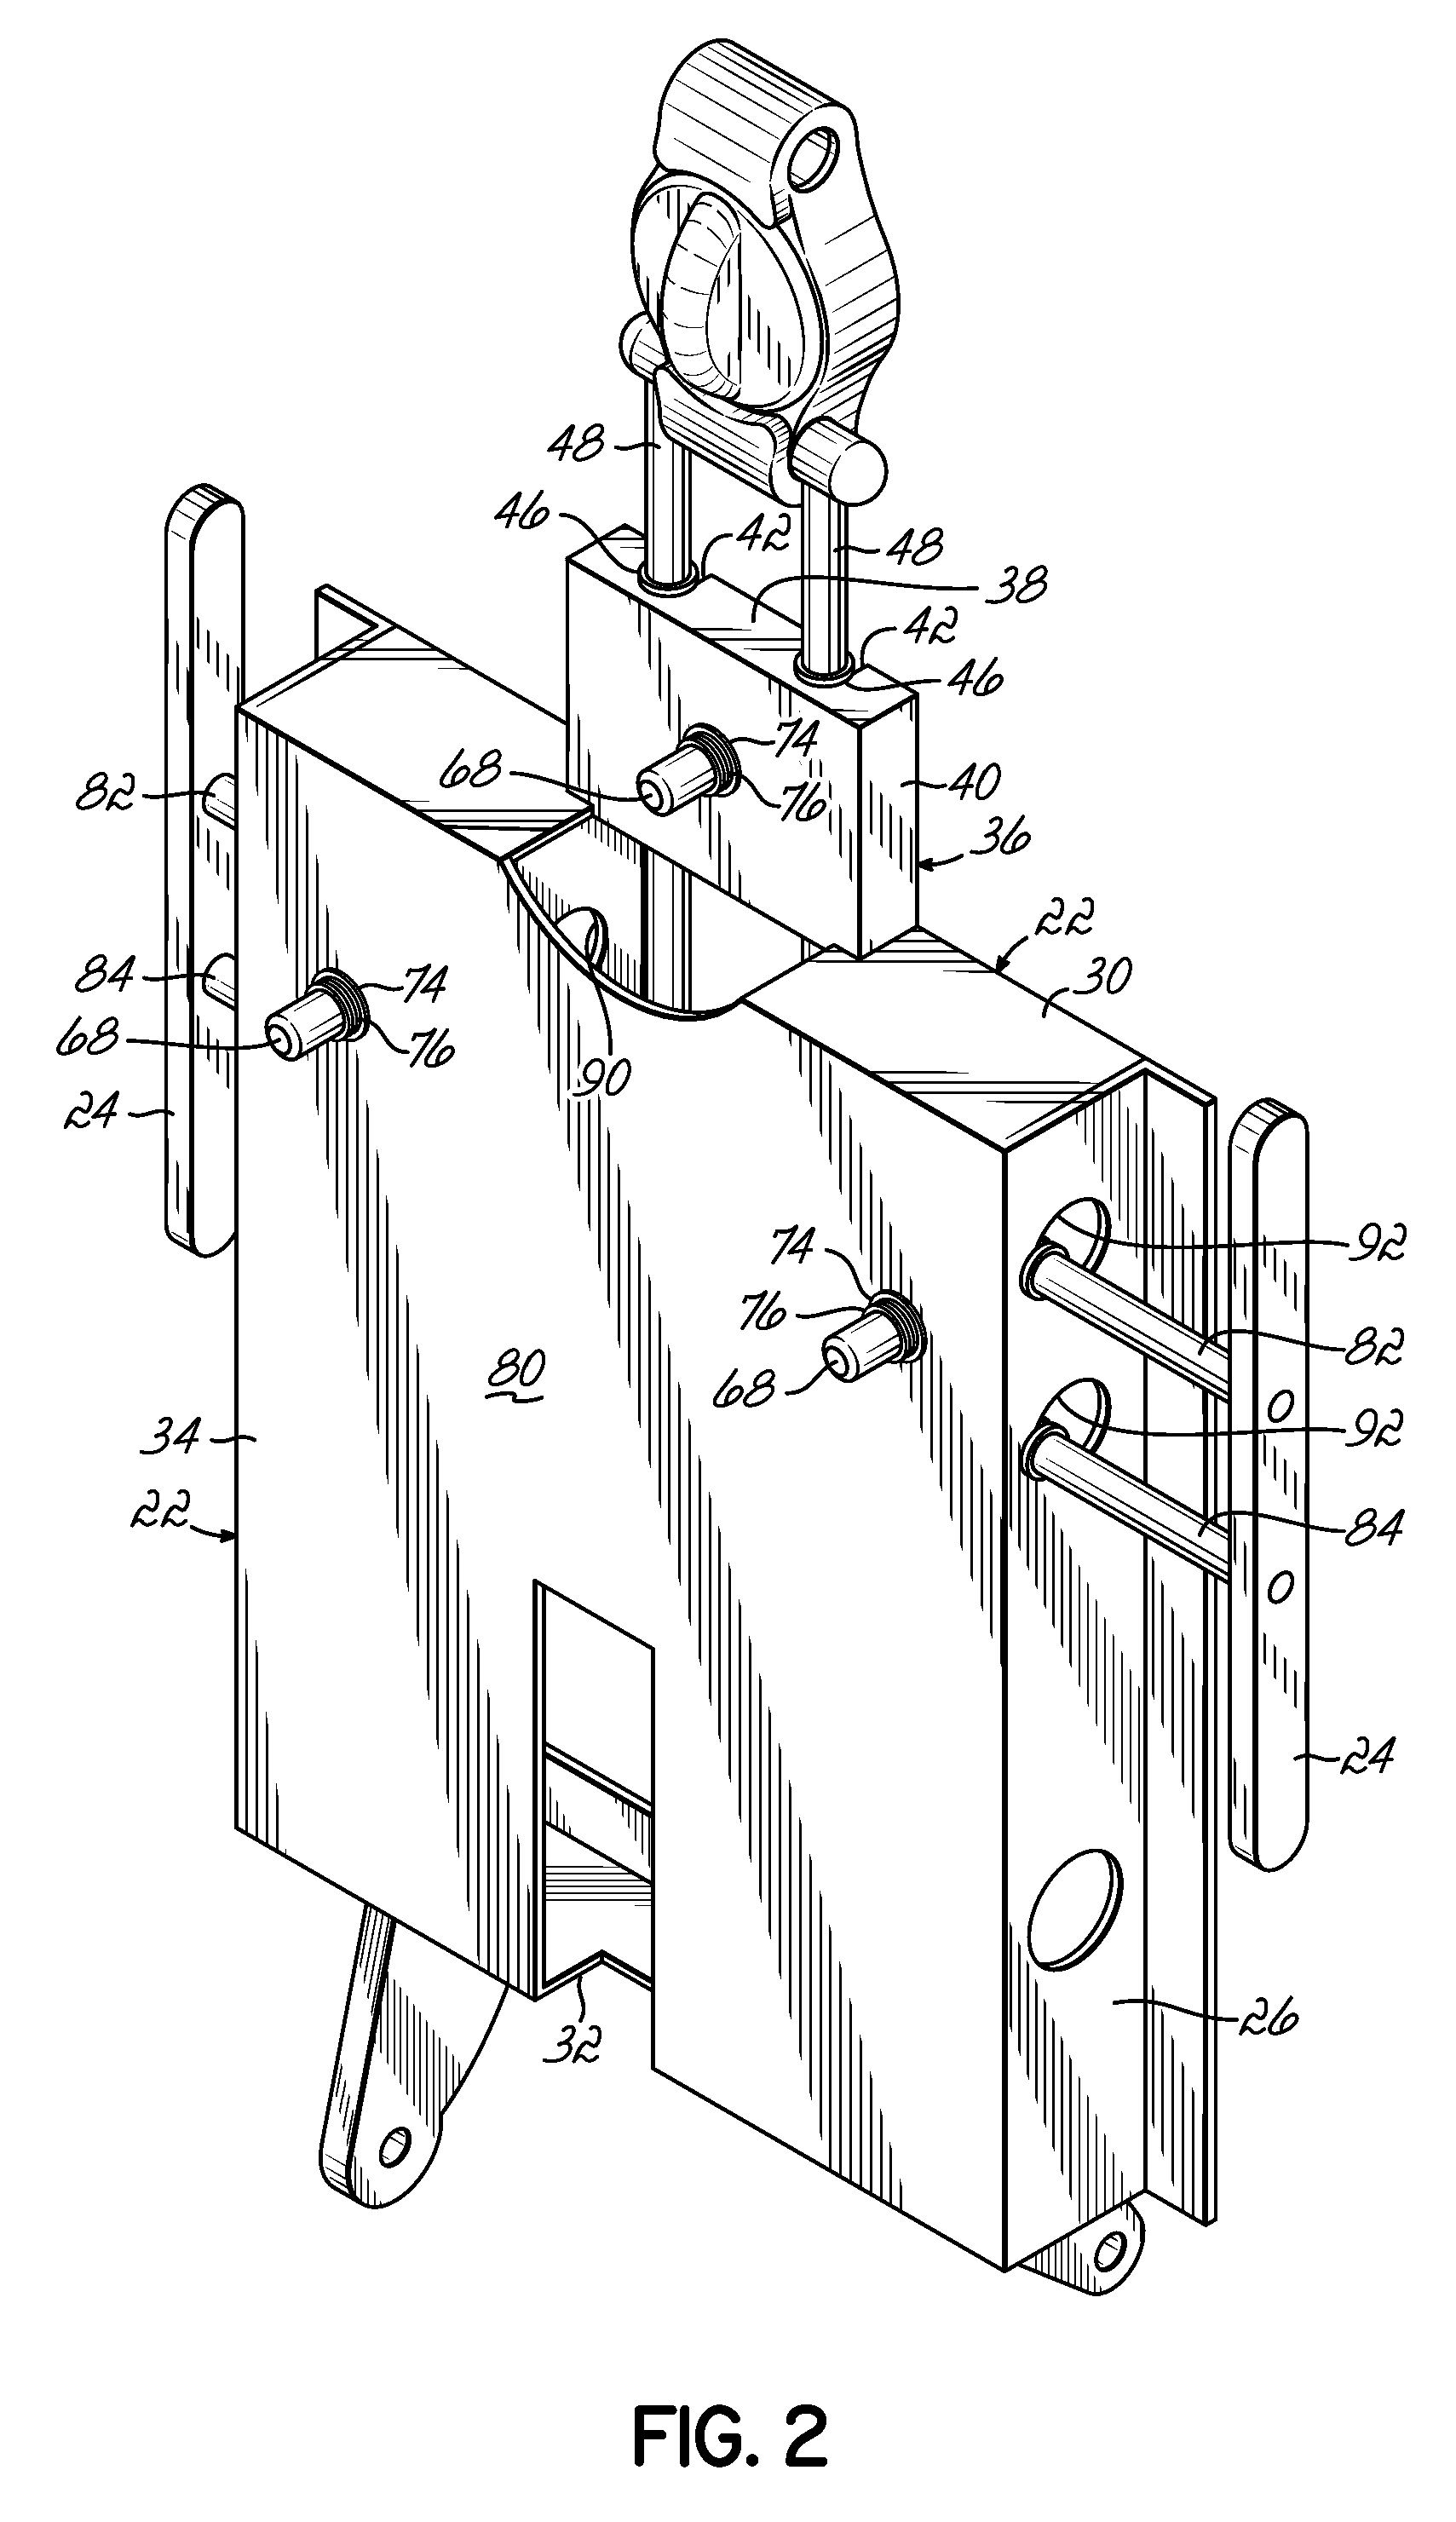 Floating bearing and clamp system for patient procedures chair mounting and positioning posts